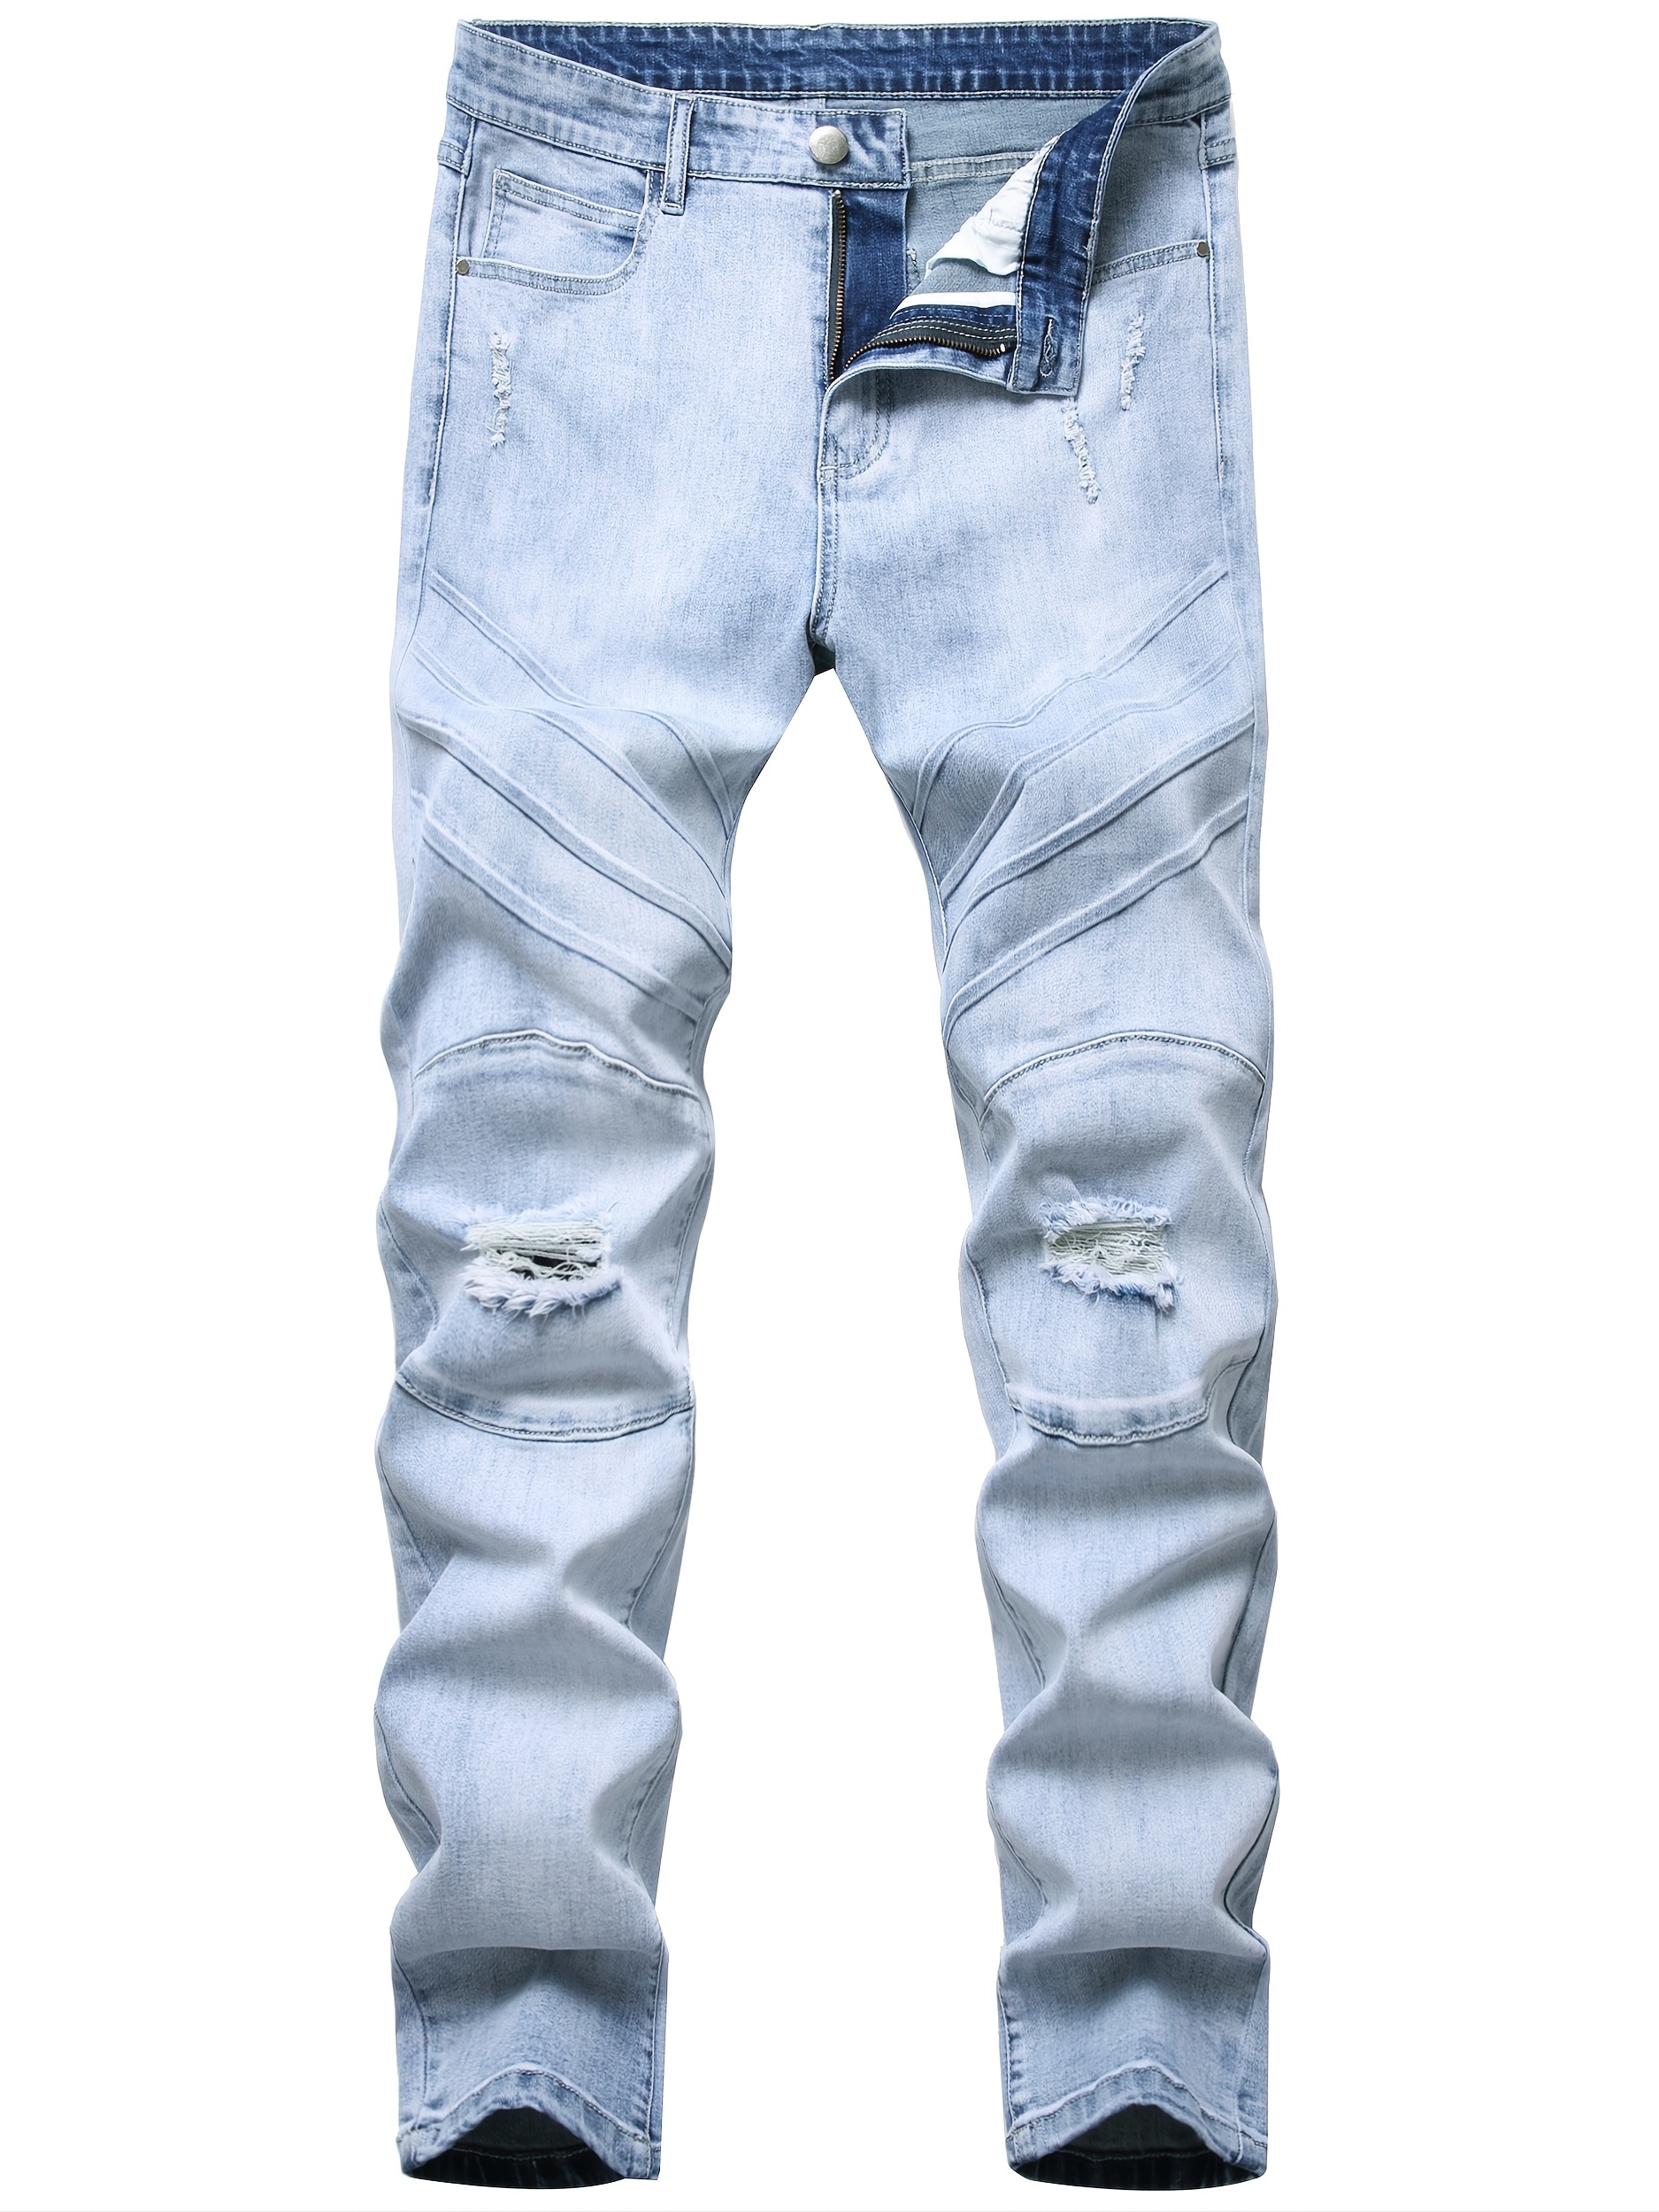 Frontwalk Men Ripped Jeans Fashion Destroyed Pants Casual Slim Fit